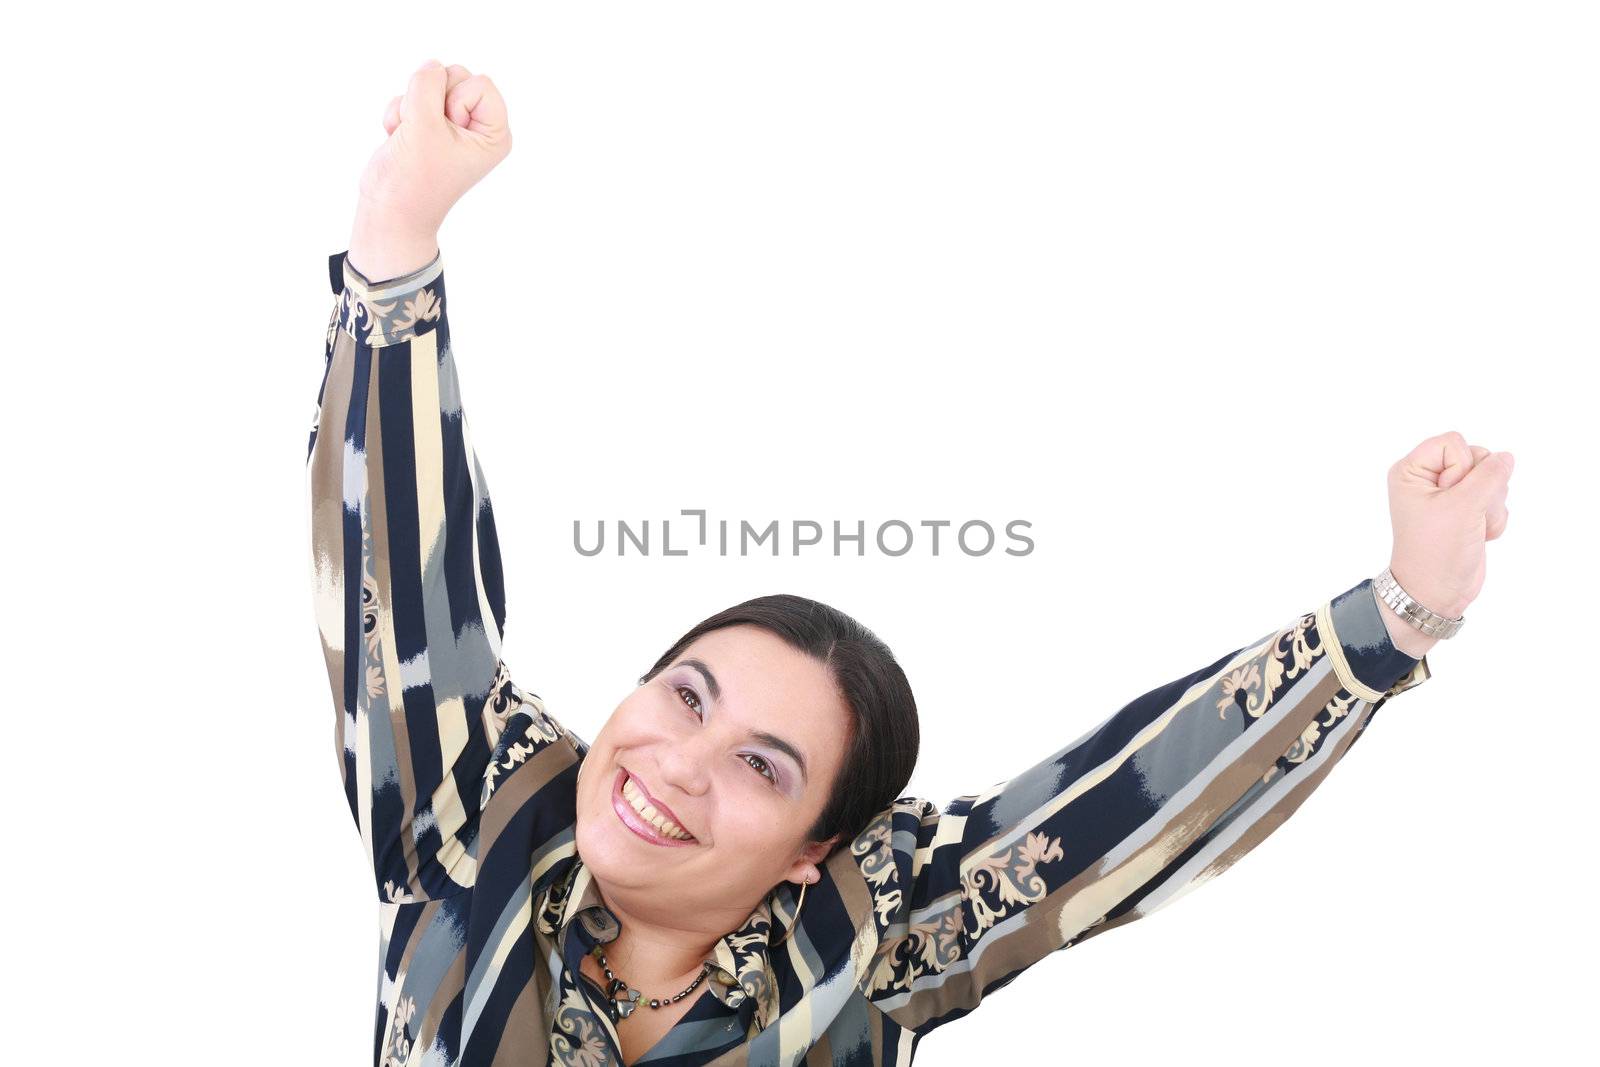 happy attractive young girl with her hands up